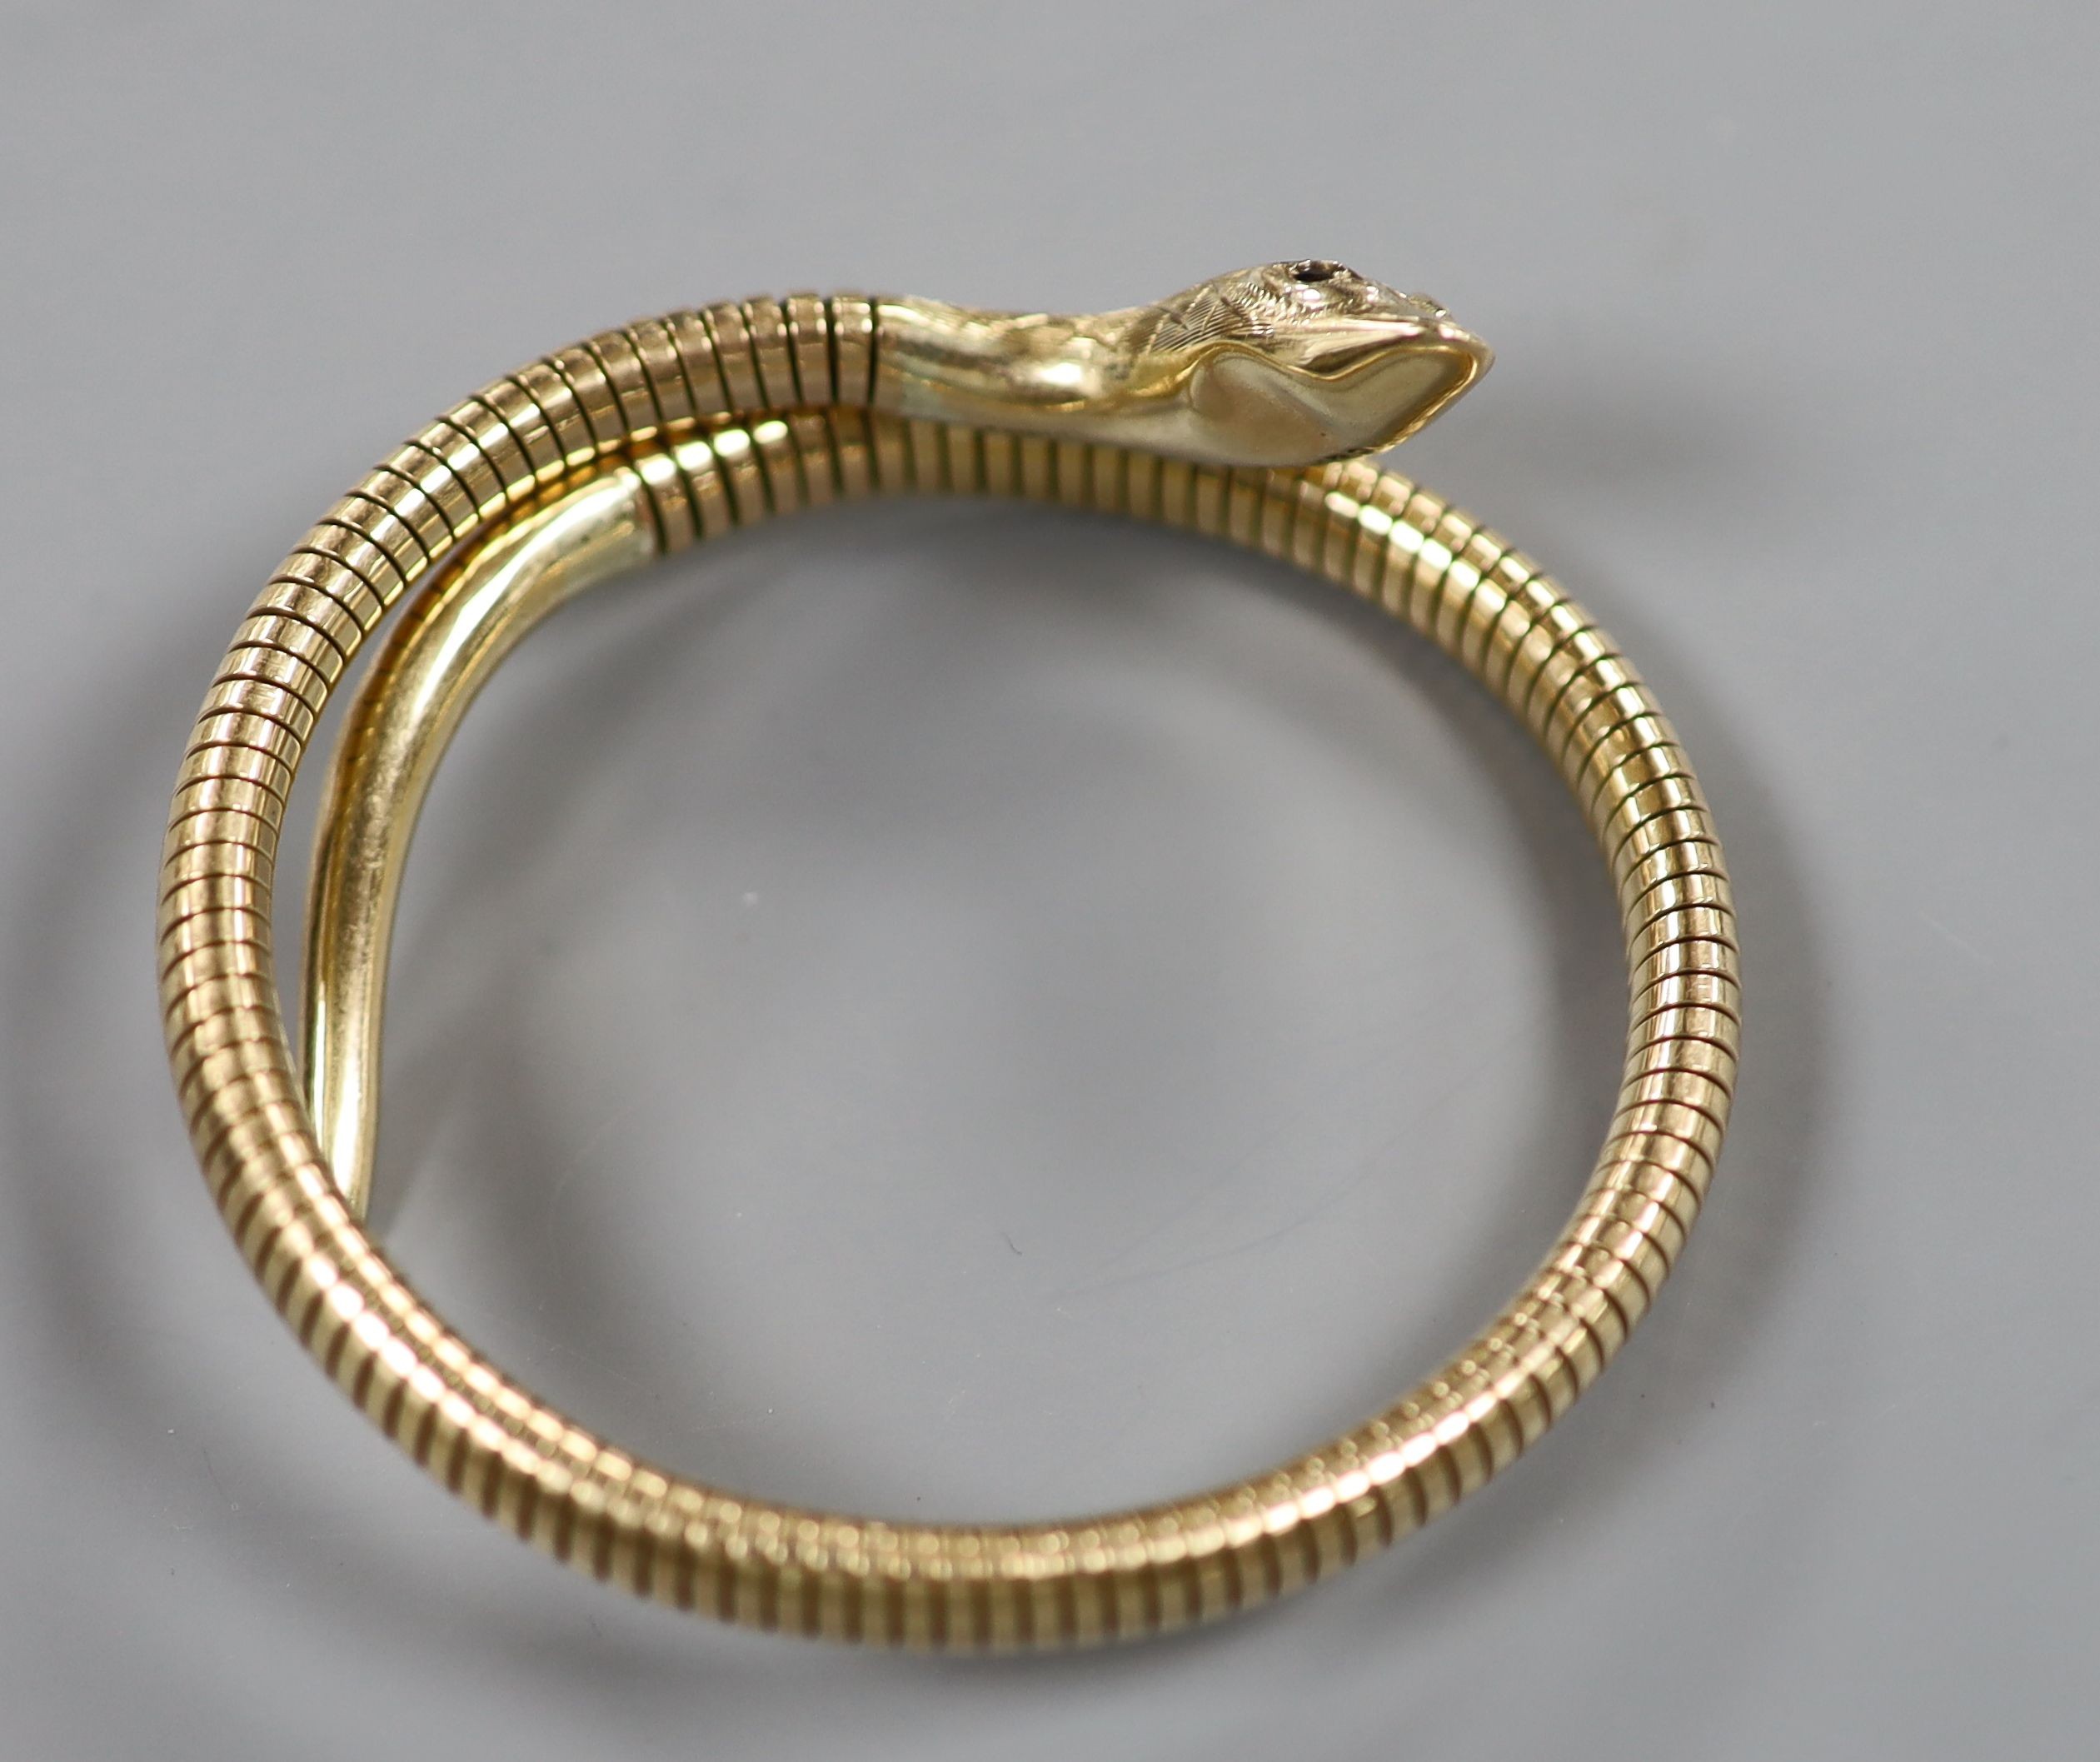 A mid 20th century 9ct gold coiled serpent bracelet, with gem set eyes, gross weight 22.4 grams (metal spring) (a.f.).